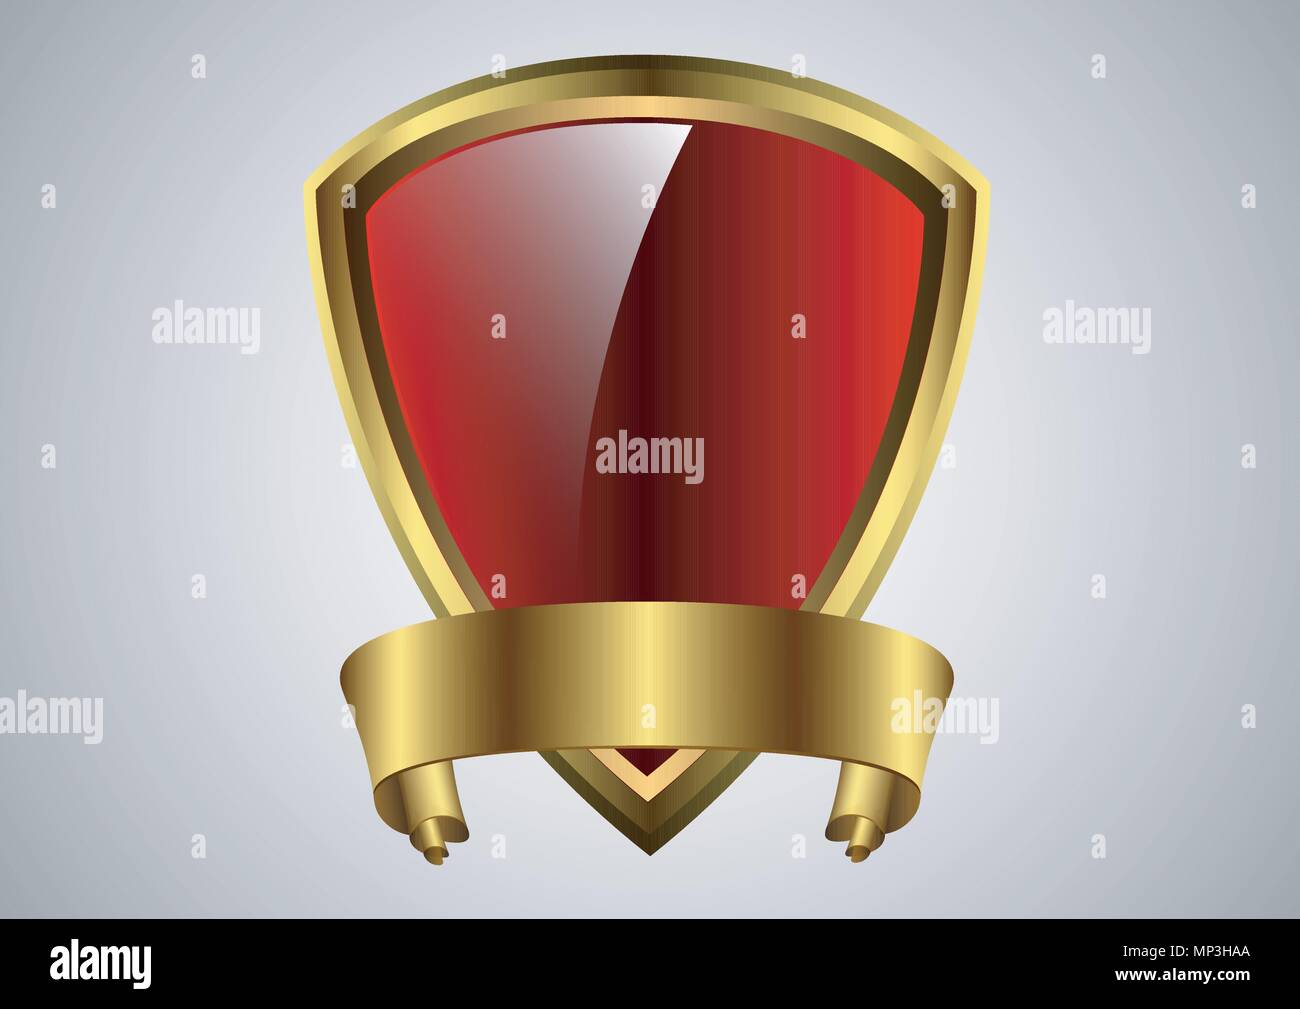 vector design of shield banner gold color Stock Vector